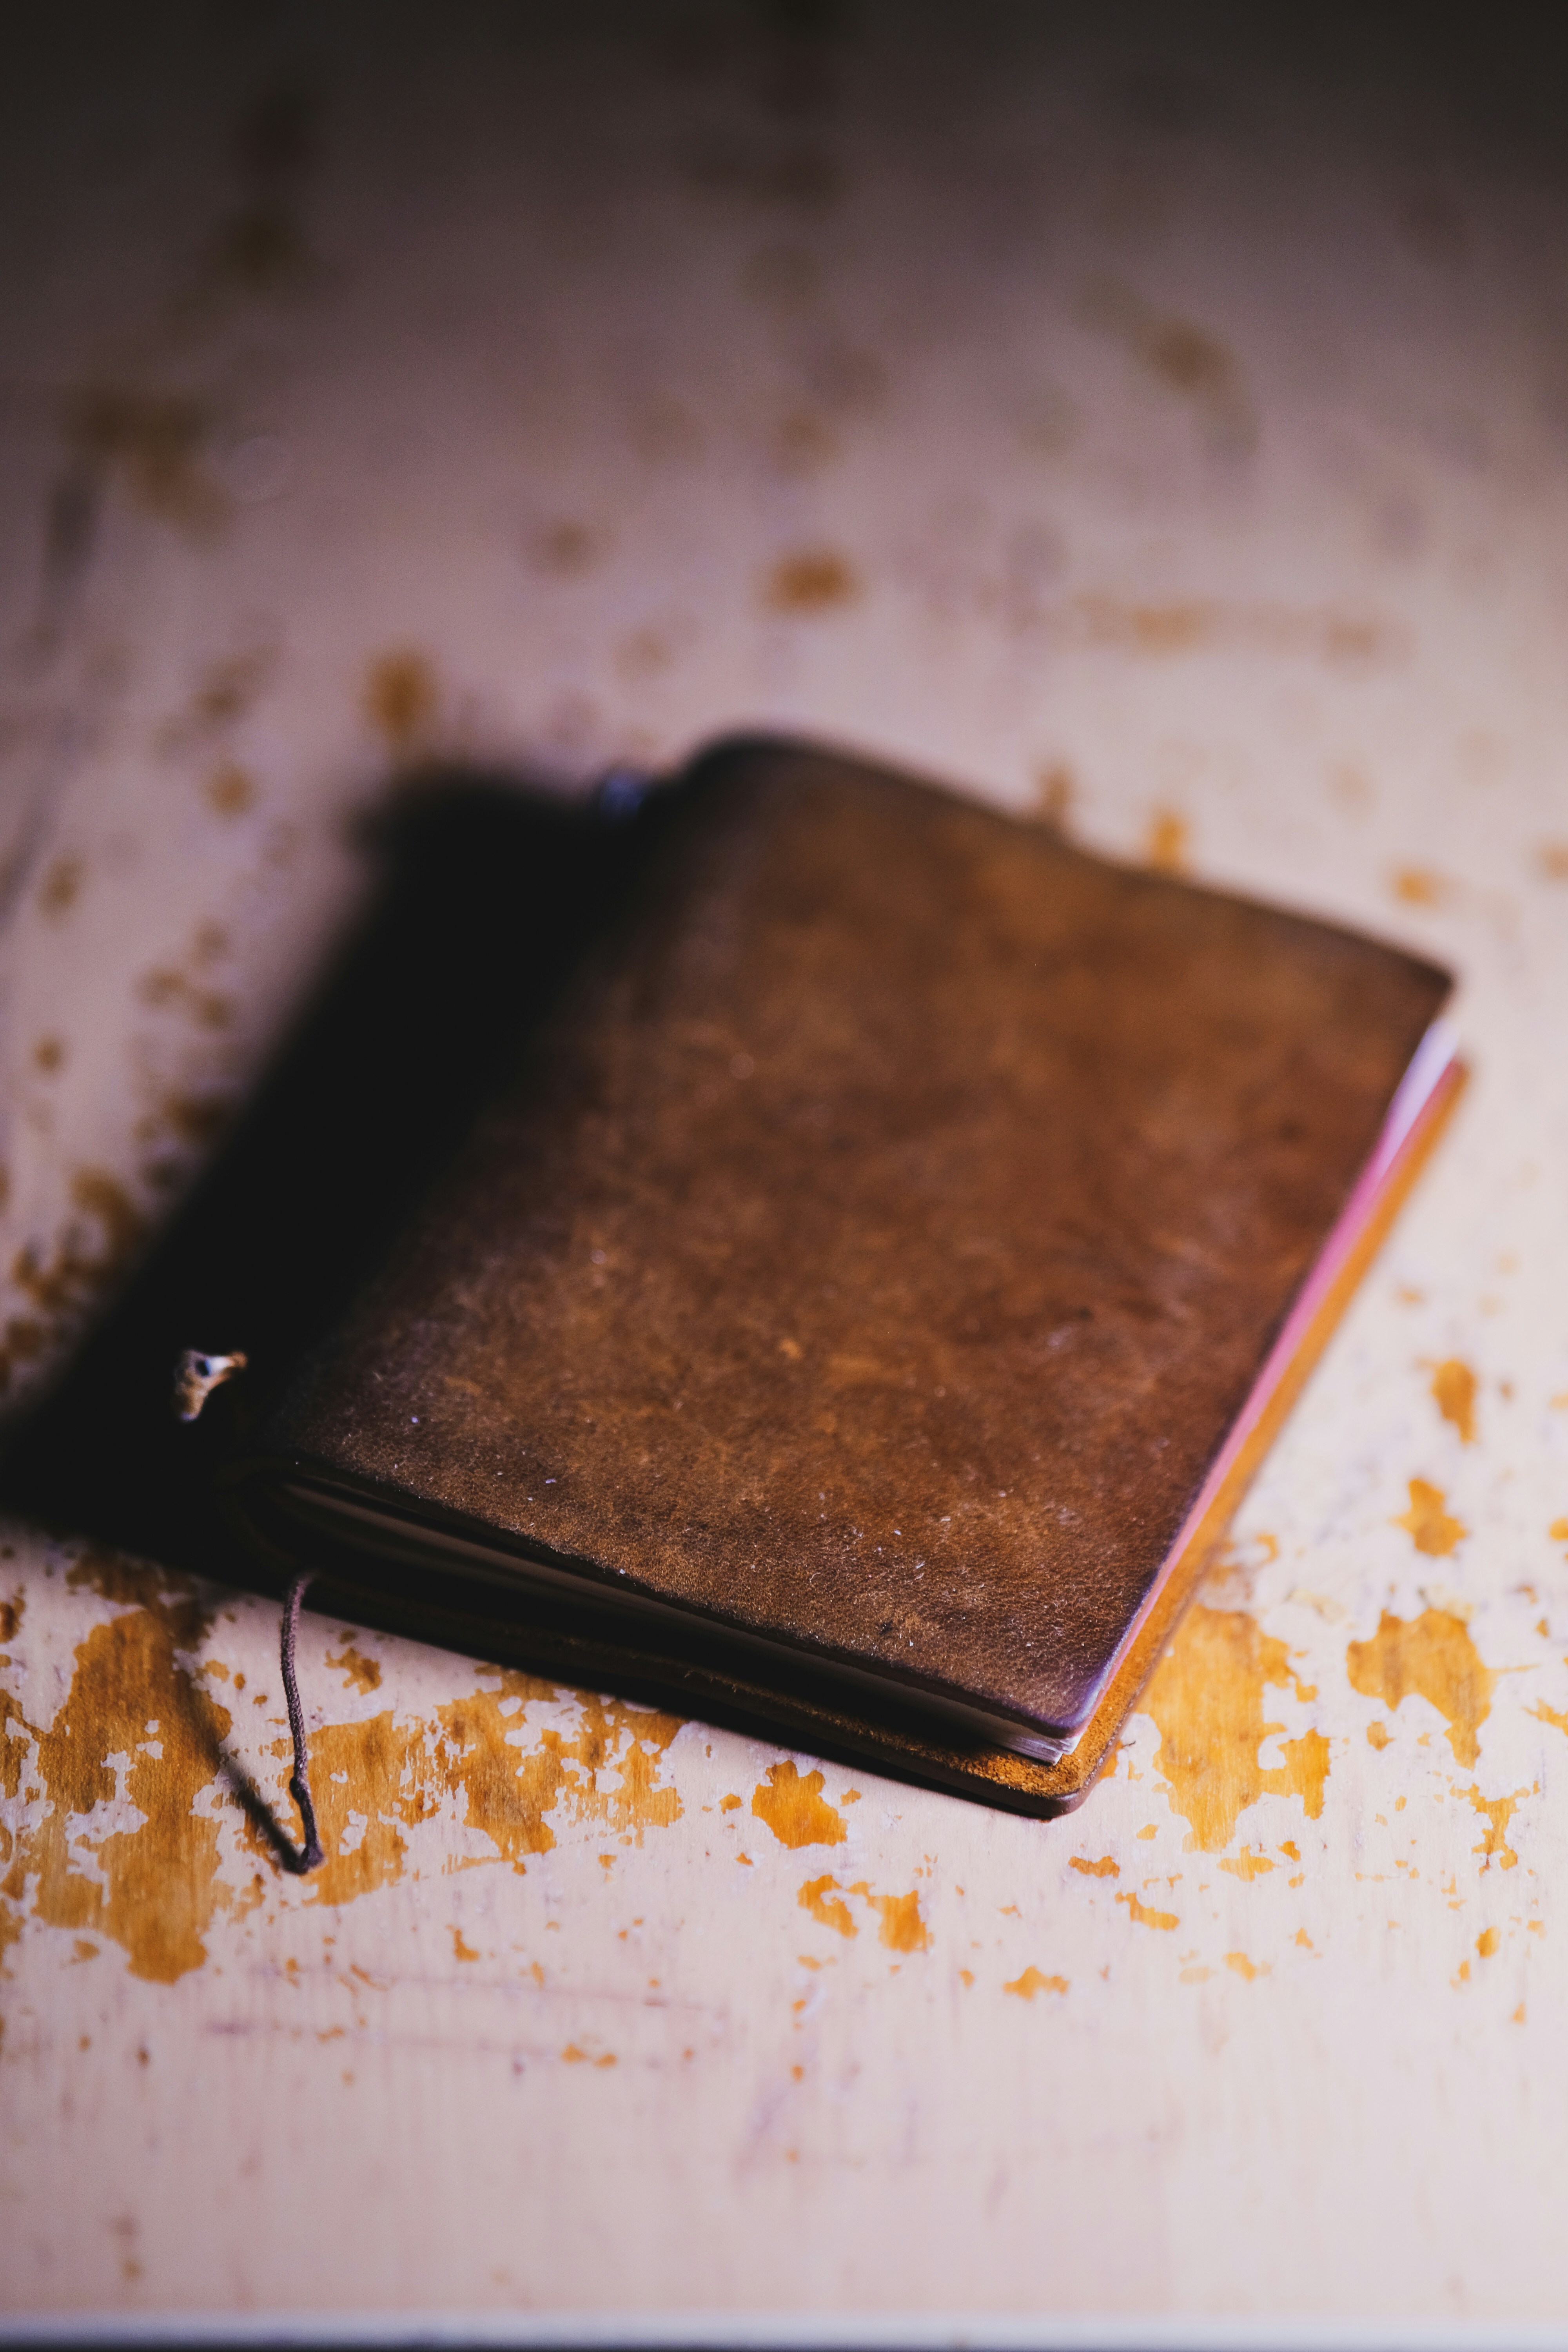 An old diary | Source: Unsplash